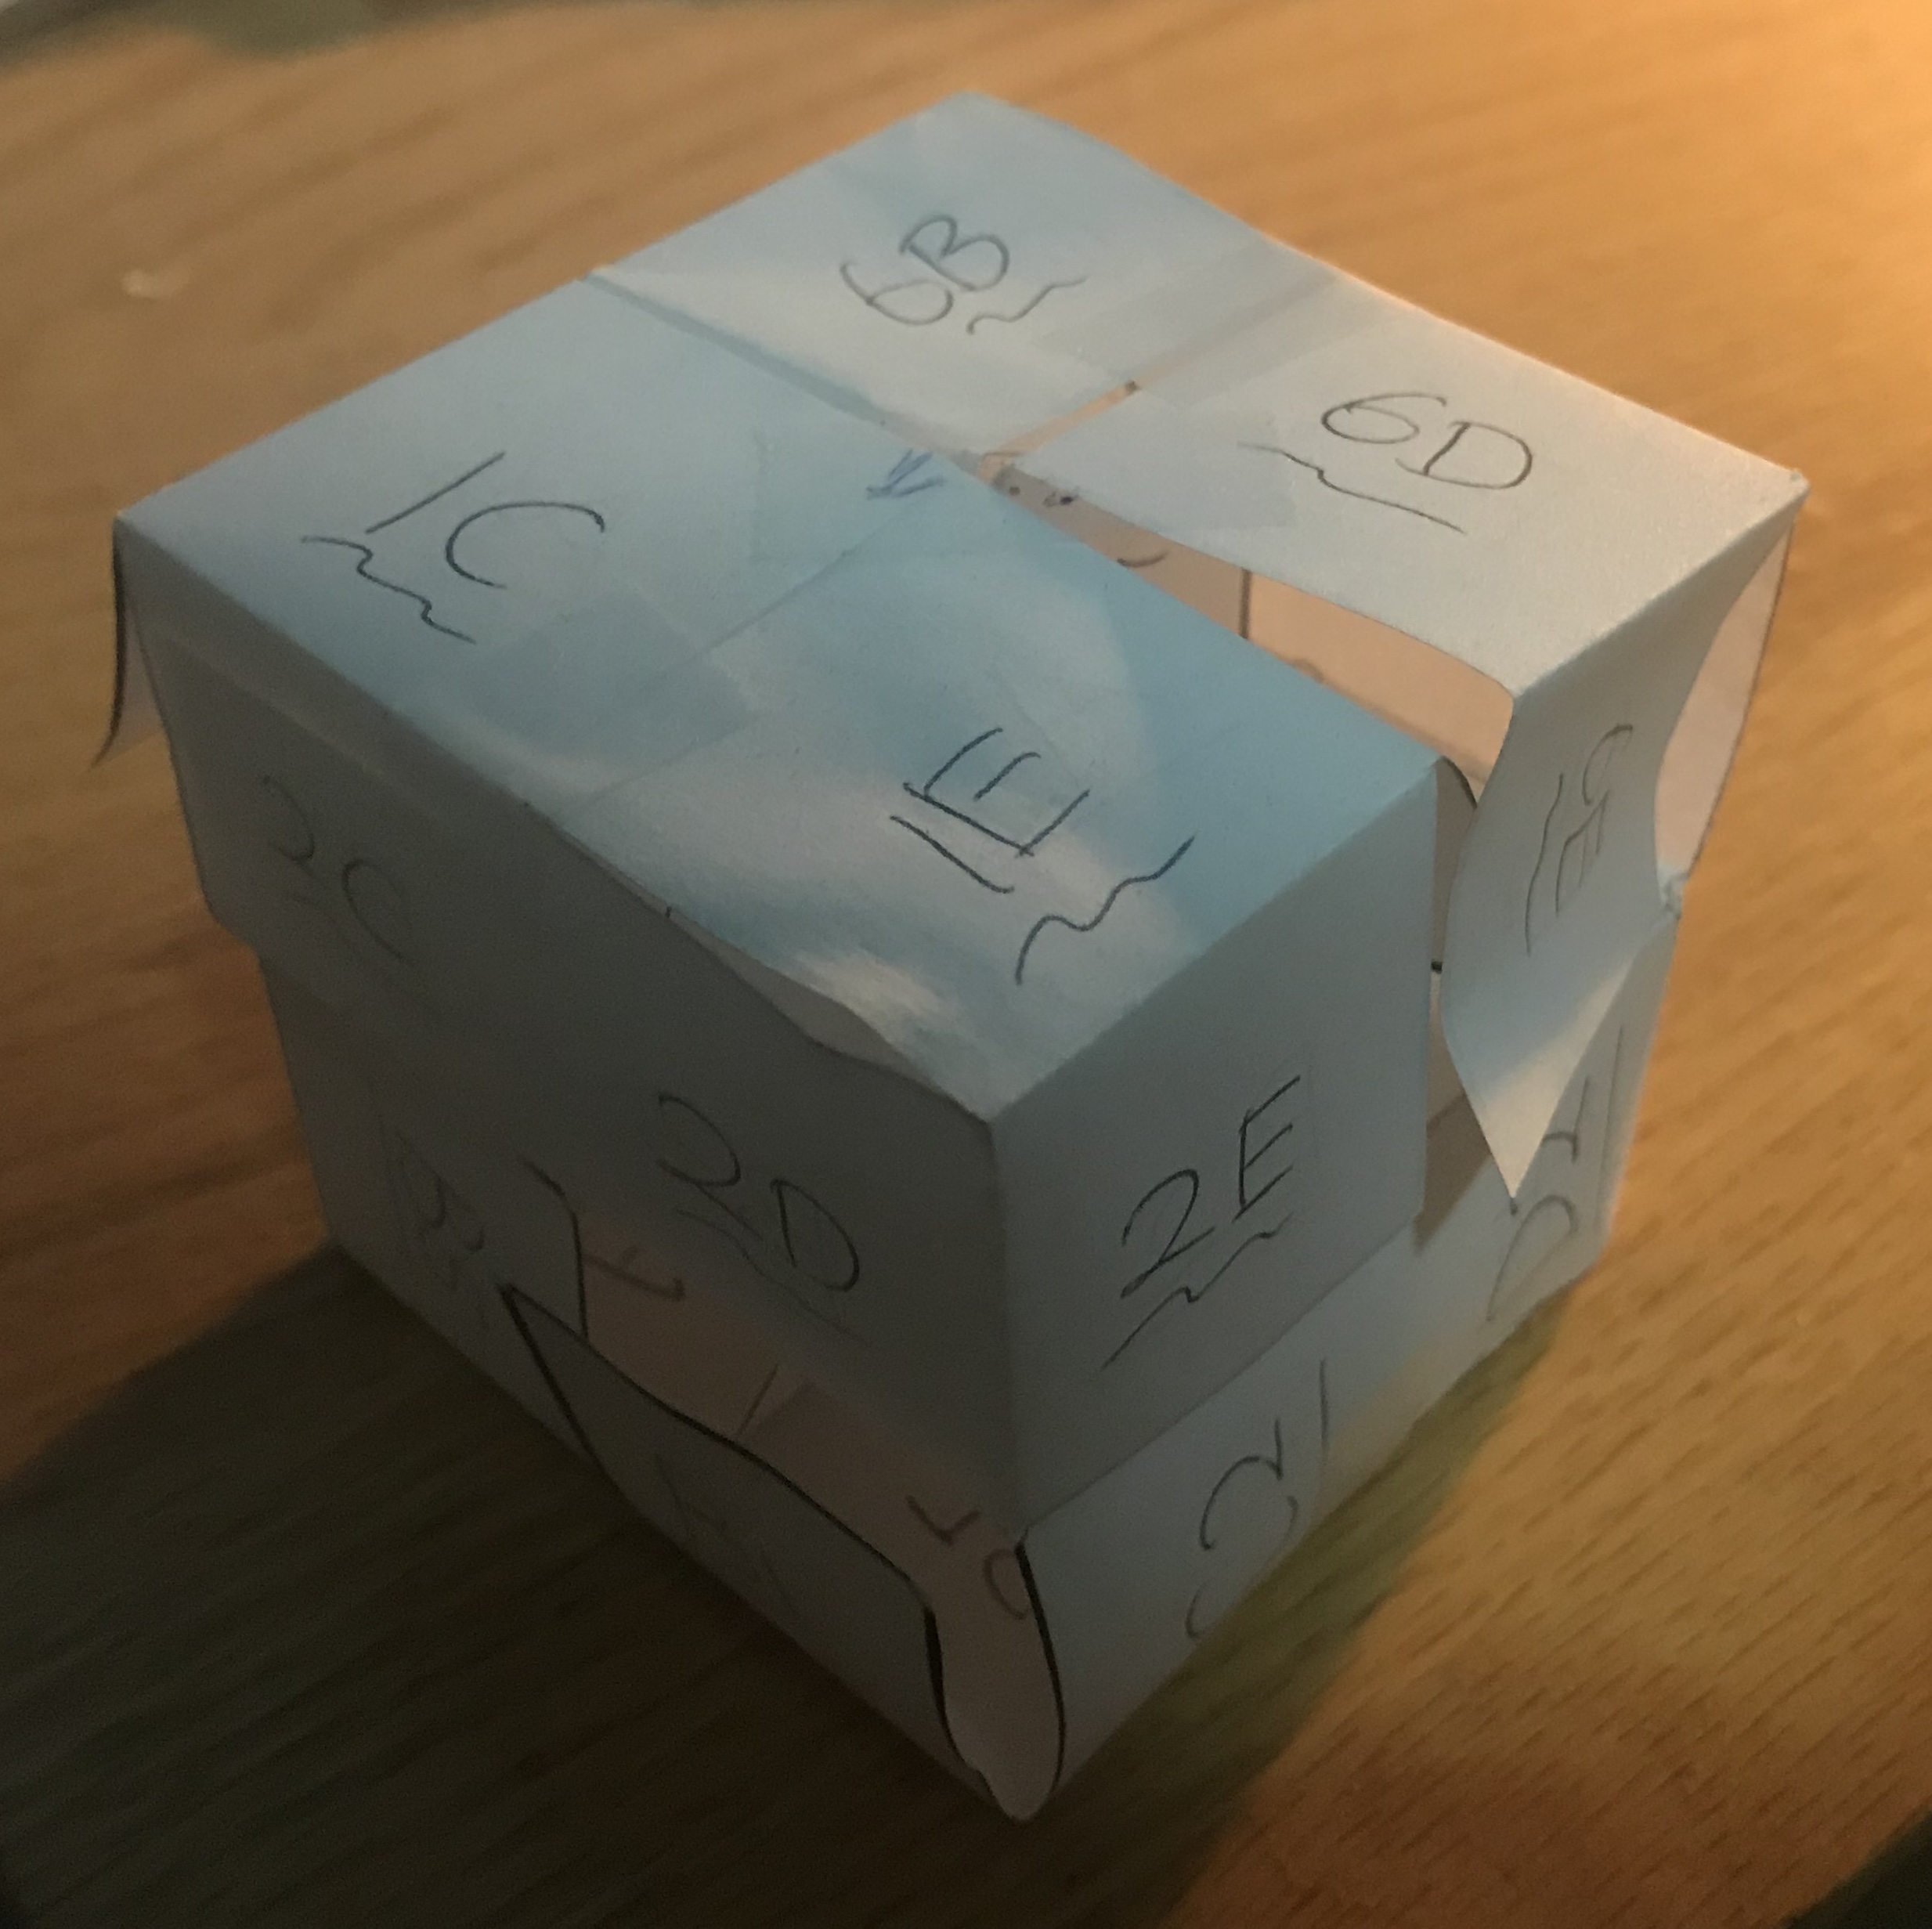 A physical, paper version of the cube.